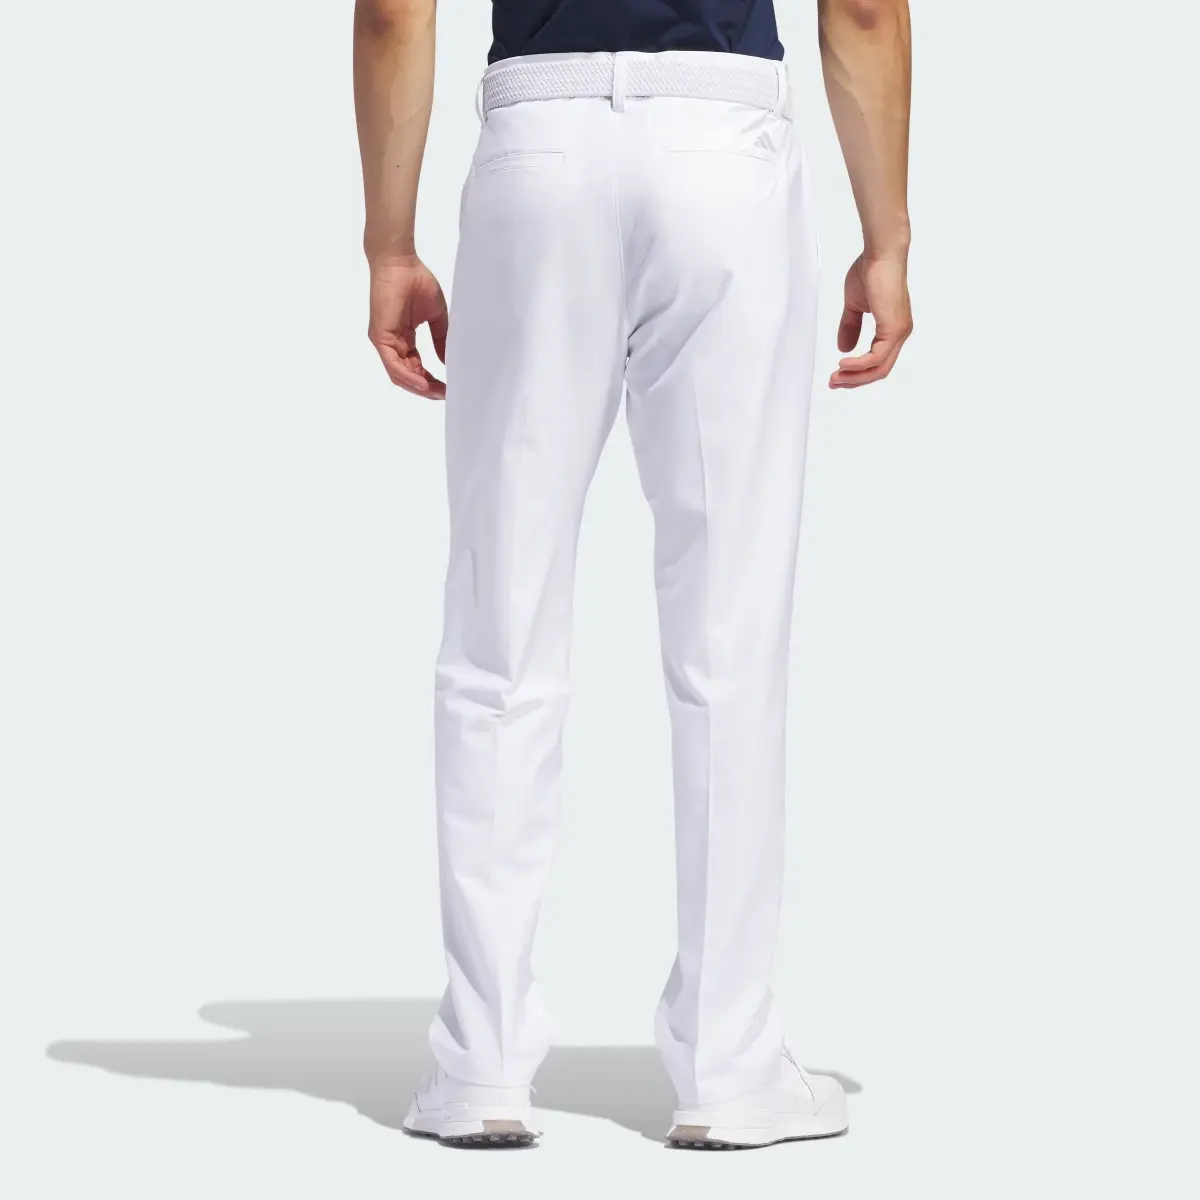 Adidas Ultimate365 Golf Trousers. 2